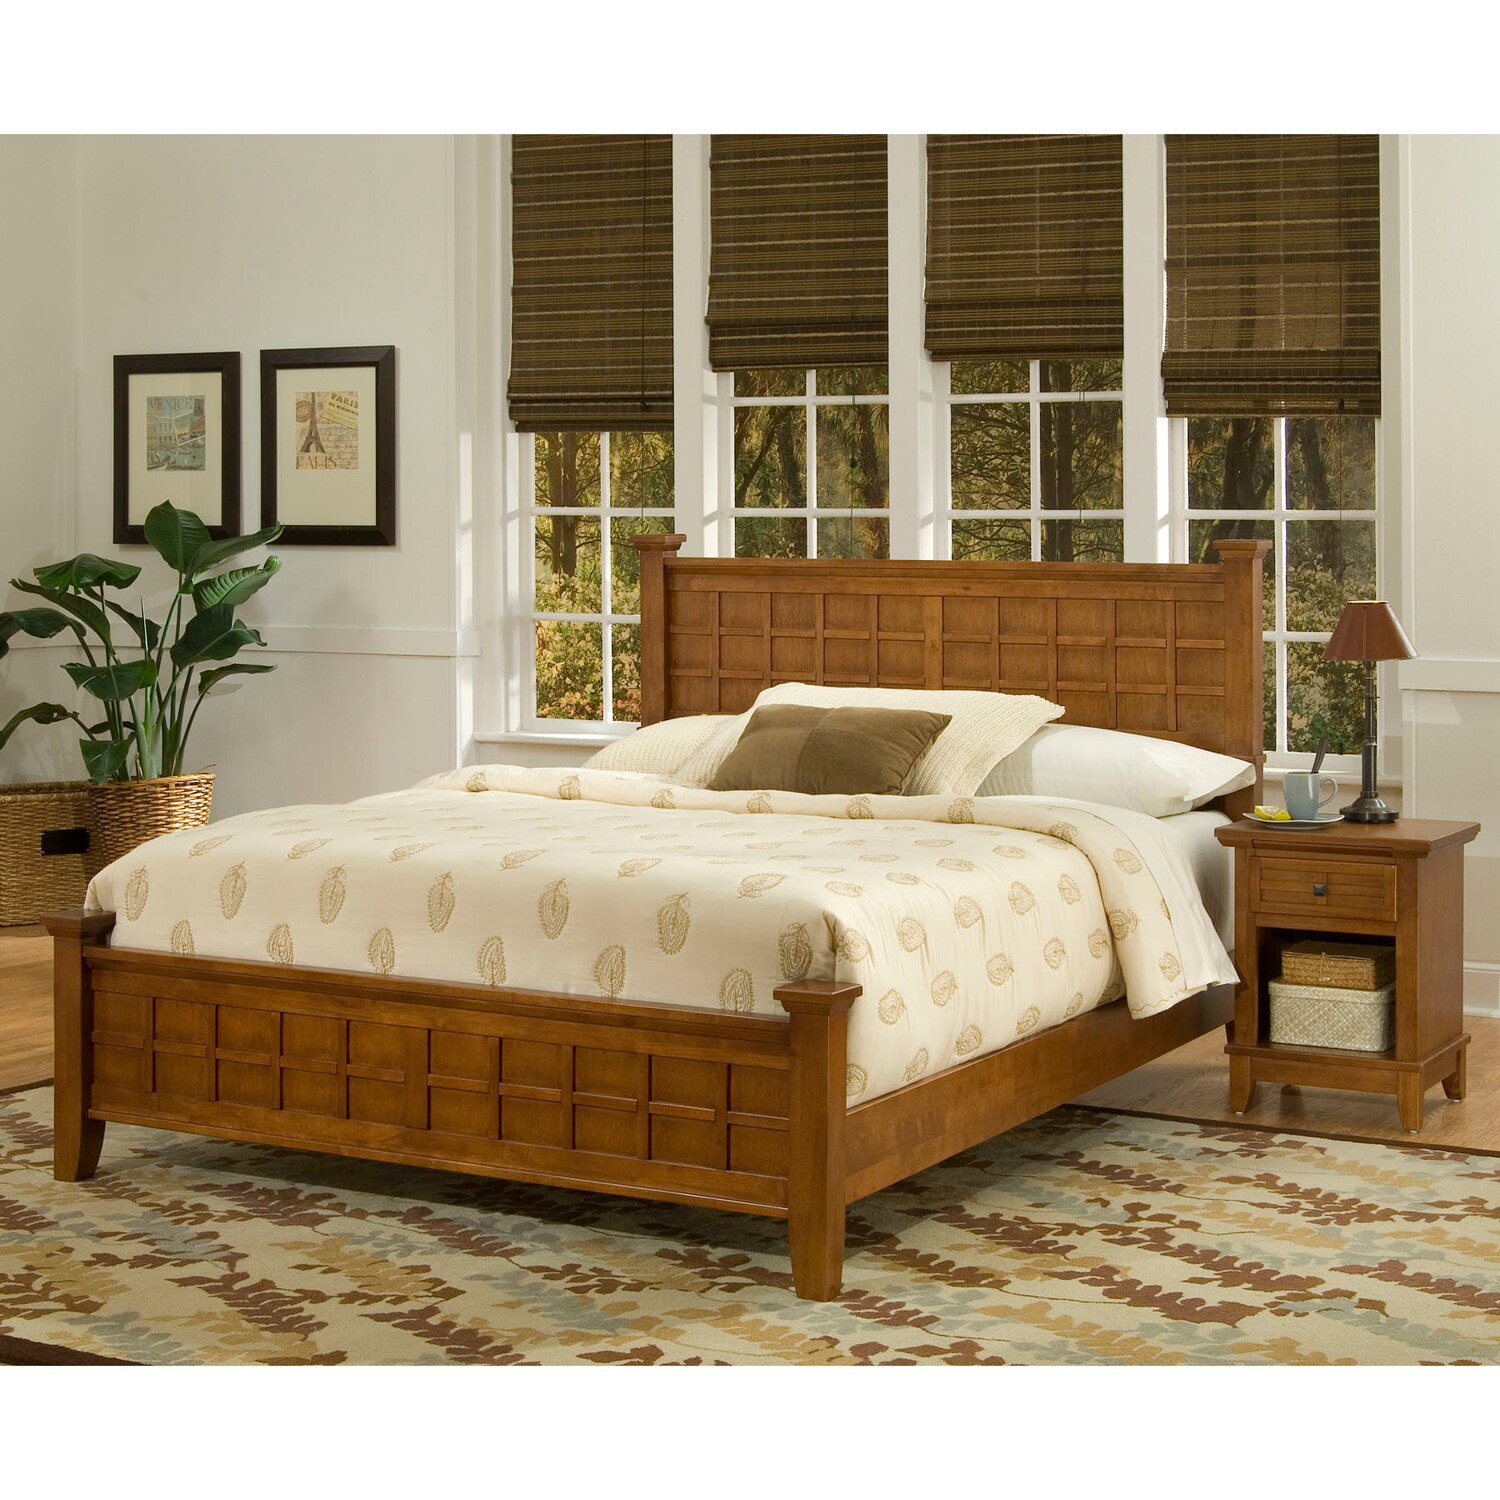 Arts Crafts Oak Queen Bed And Night Stand Cottage By Home Styles